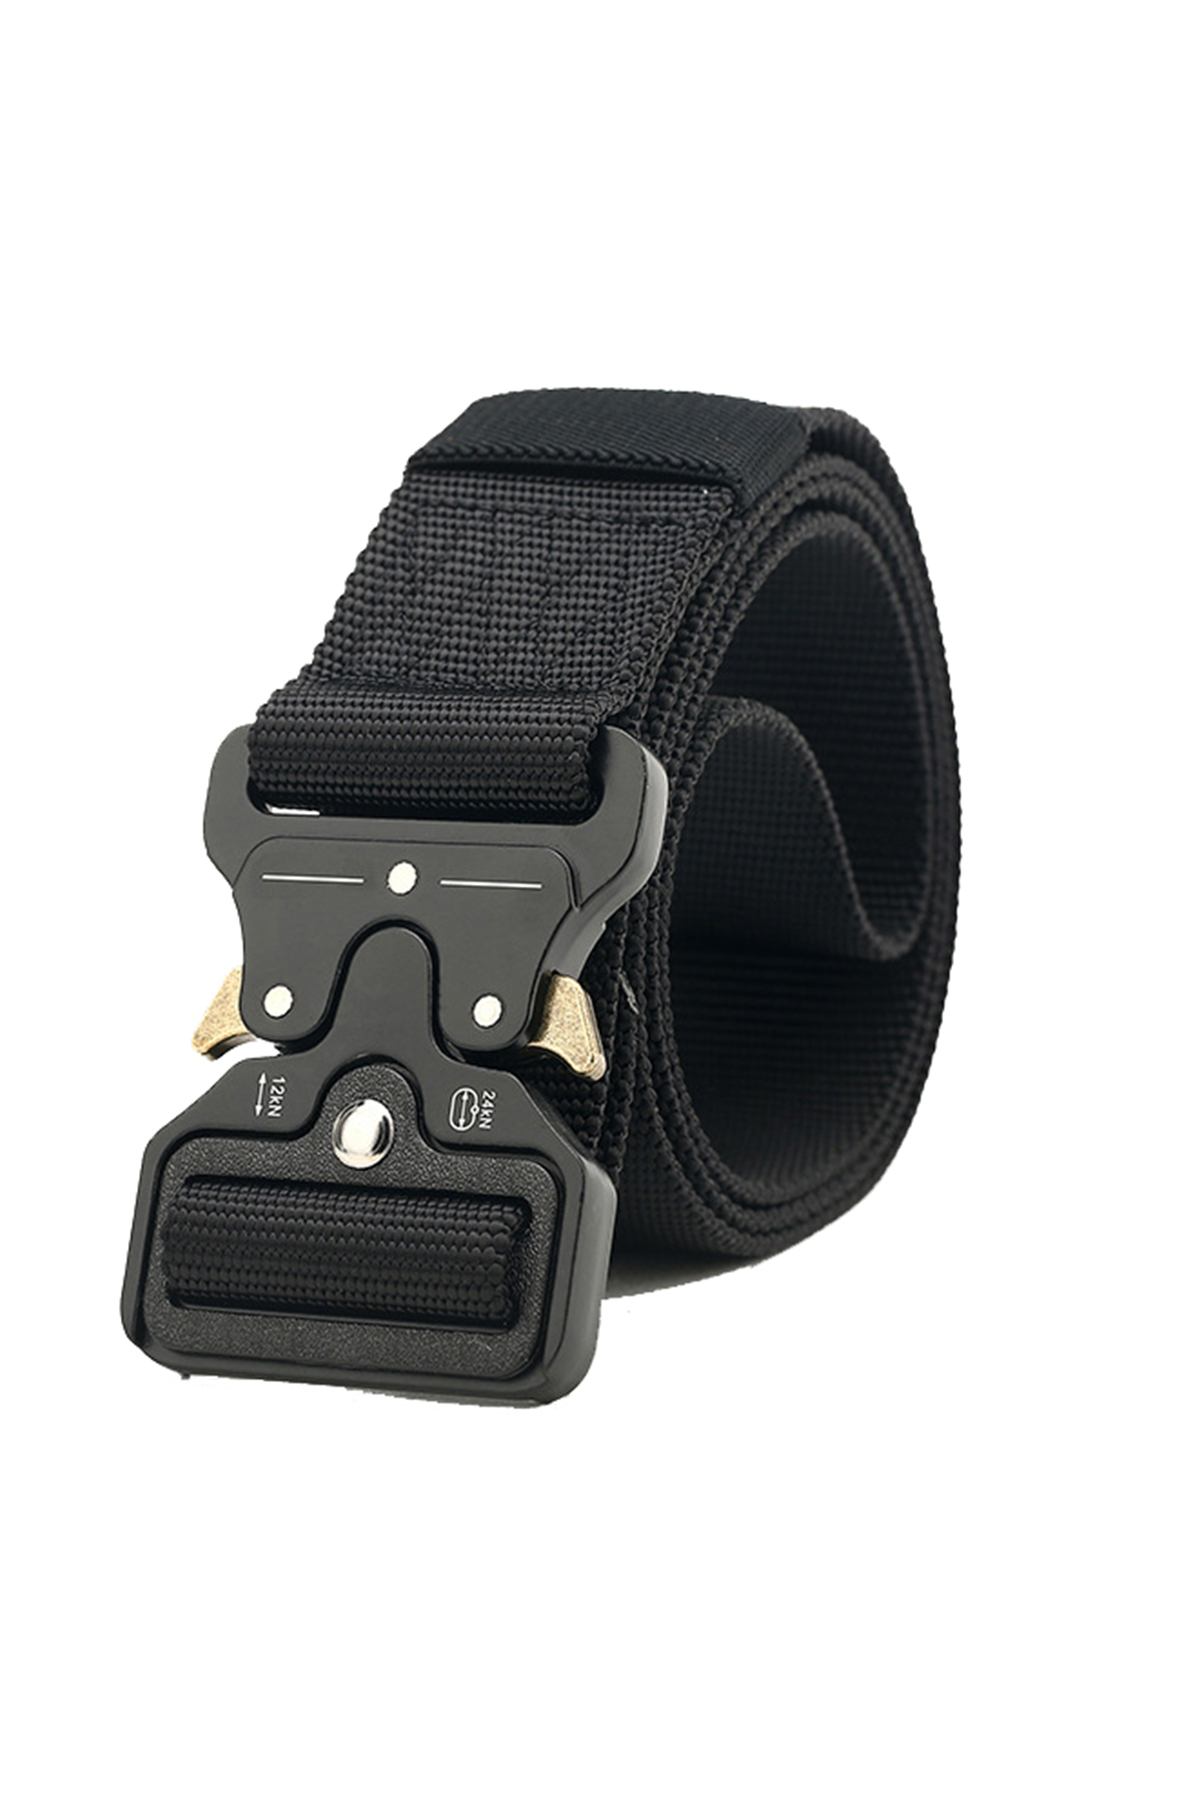 Black Military Style Tactical Belt Nylon Belt with Heavy-Duty Quick-Release Metal Buckle